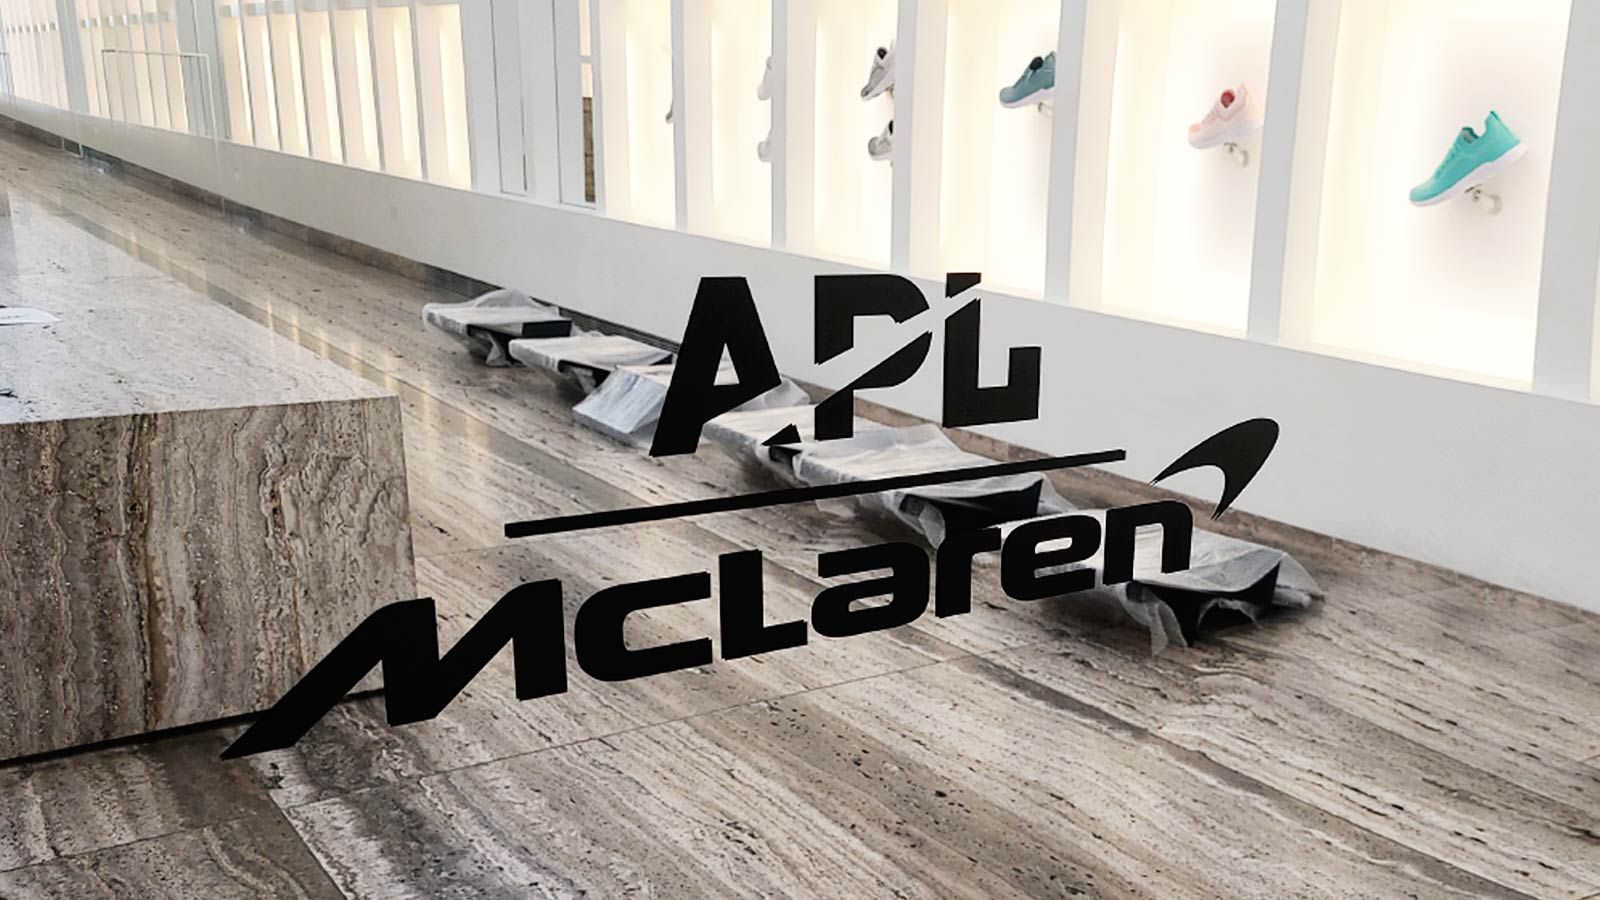 APL Mclaren vinyl lettering attached to the glass